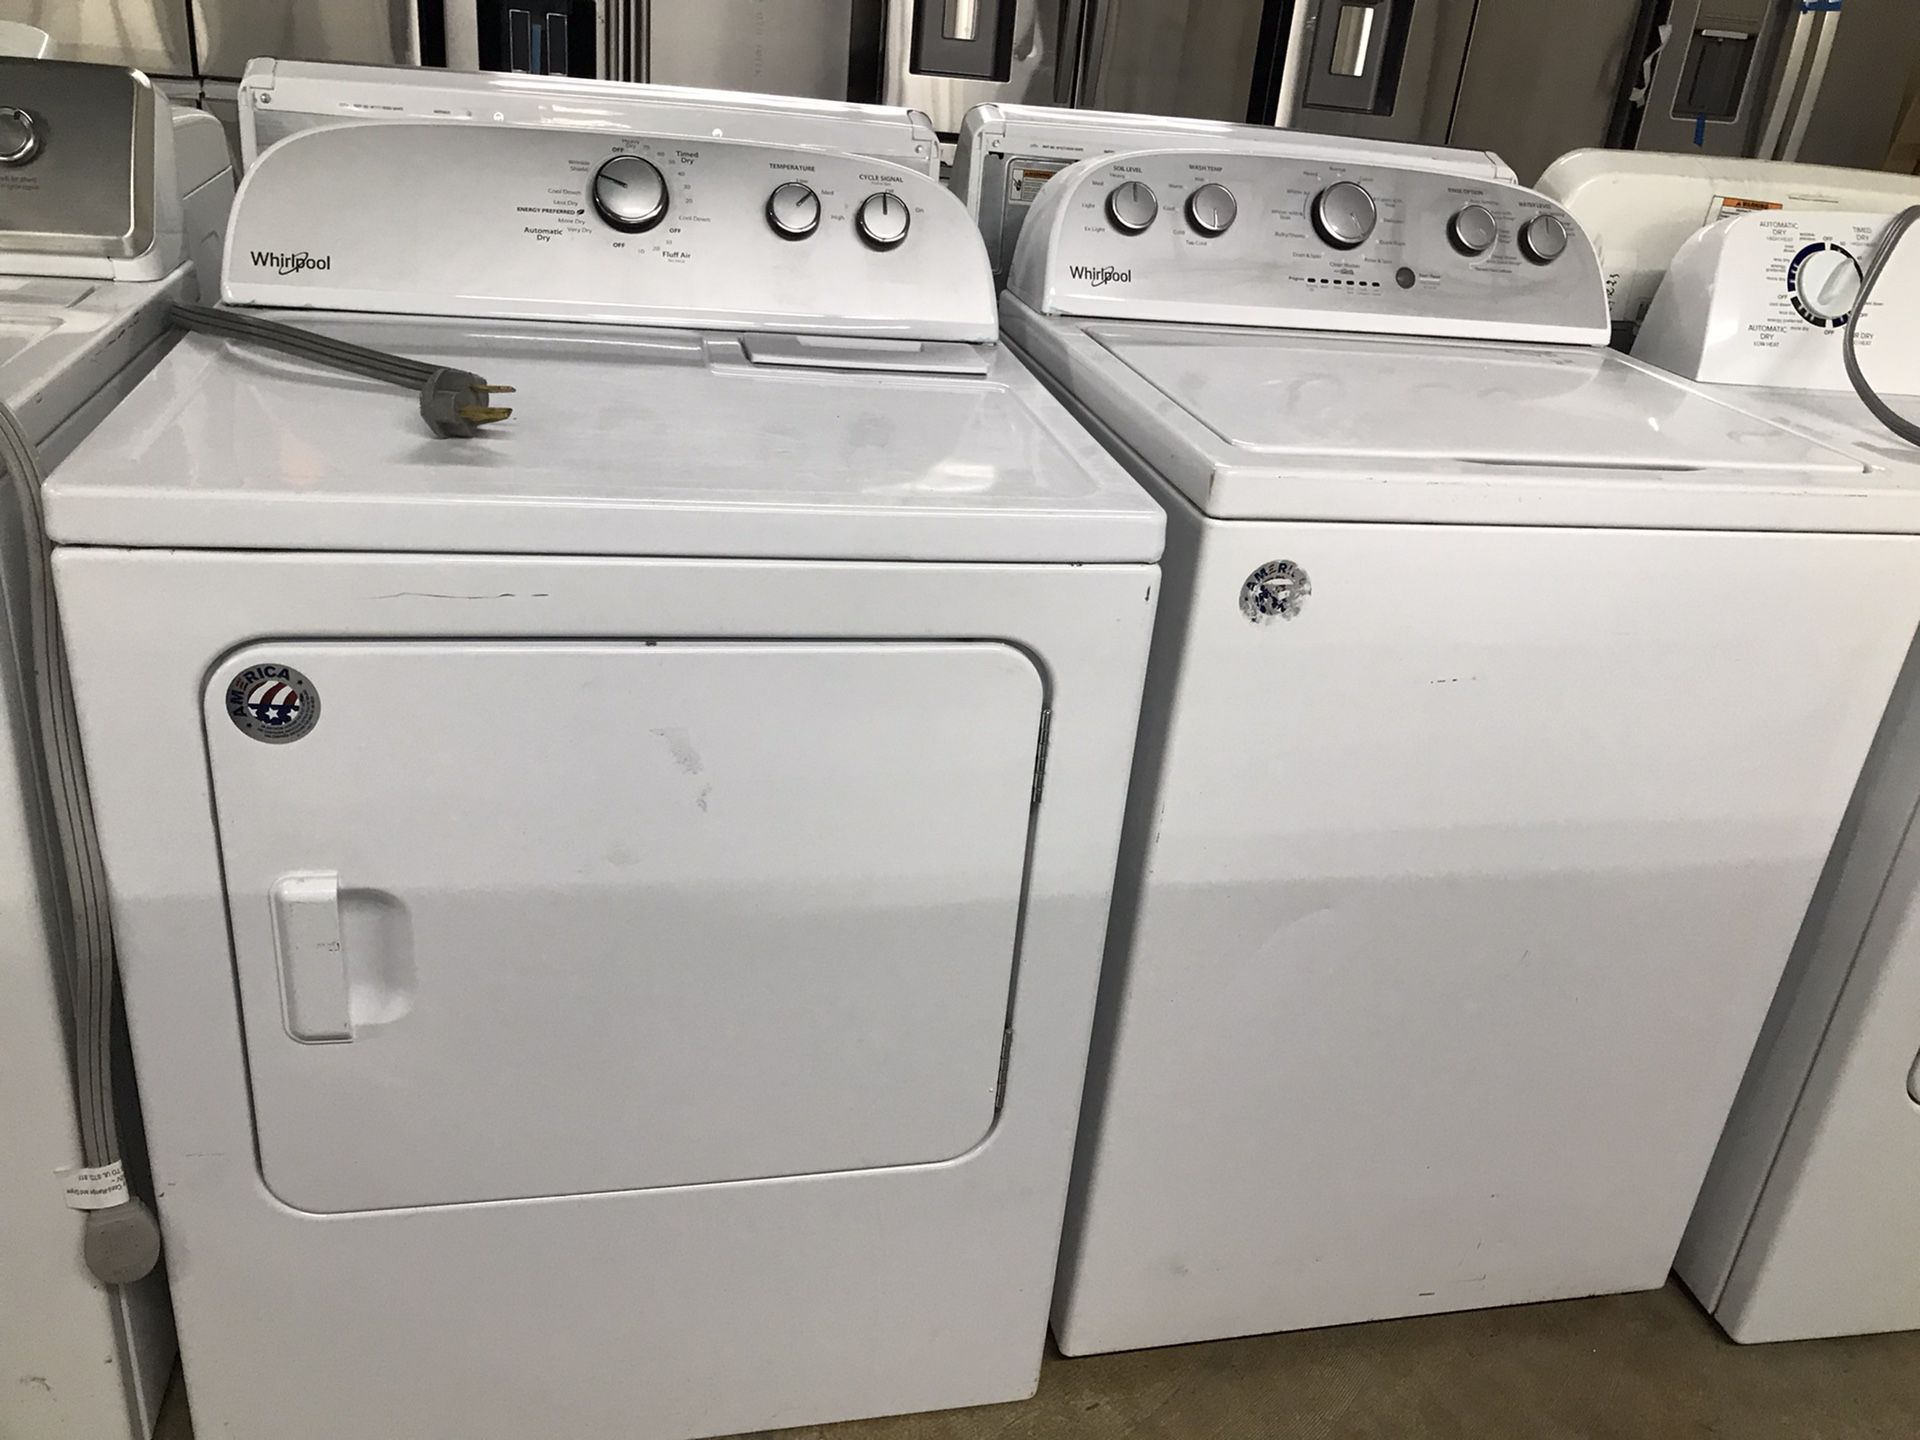 Whirlpool washer and dryer set